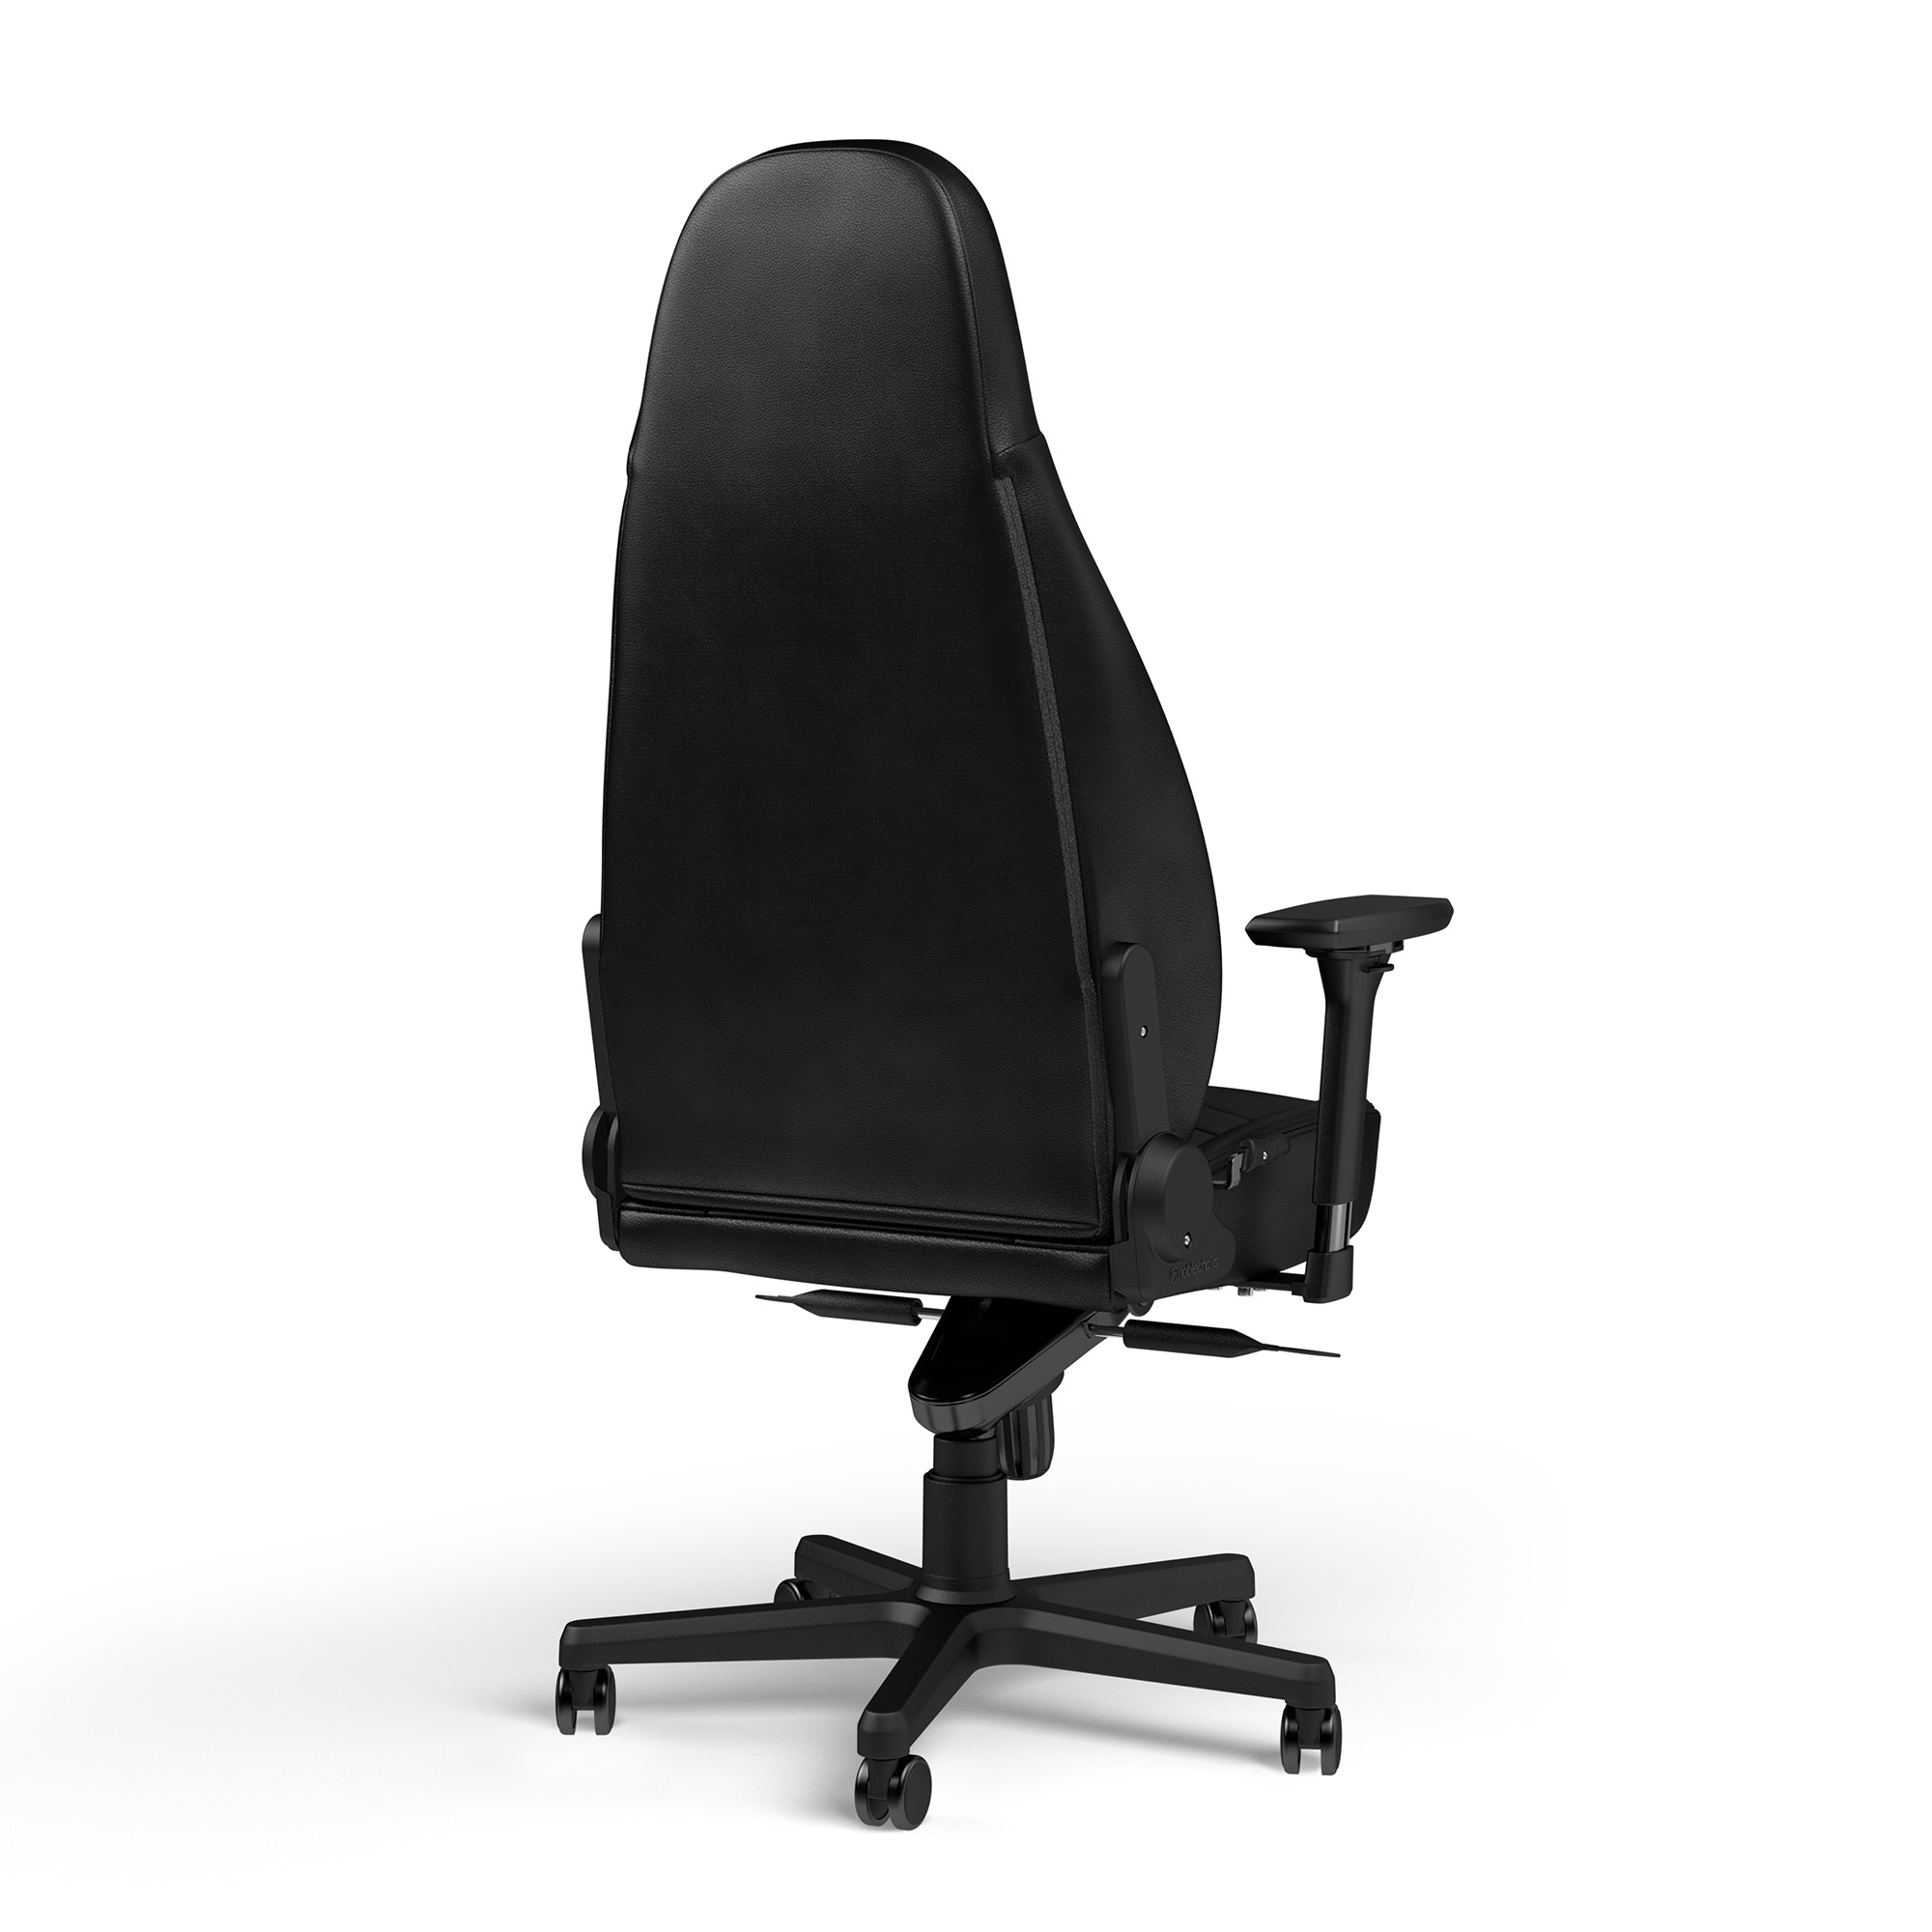 noblechairs - noblechairs ICON Top Grain Leather Gaming Chair - Black